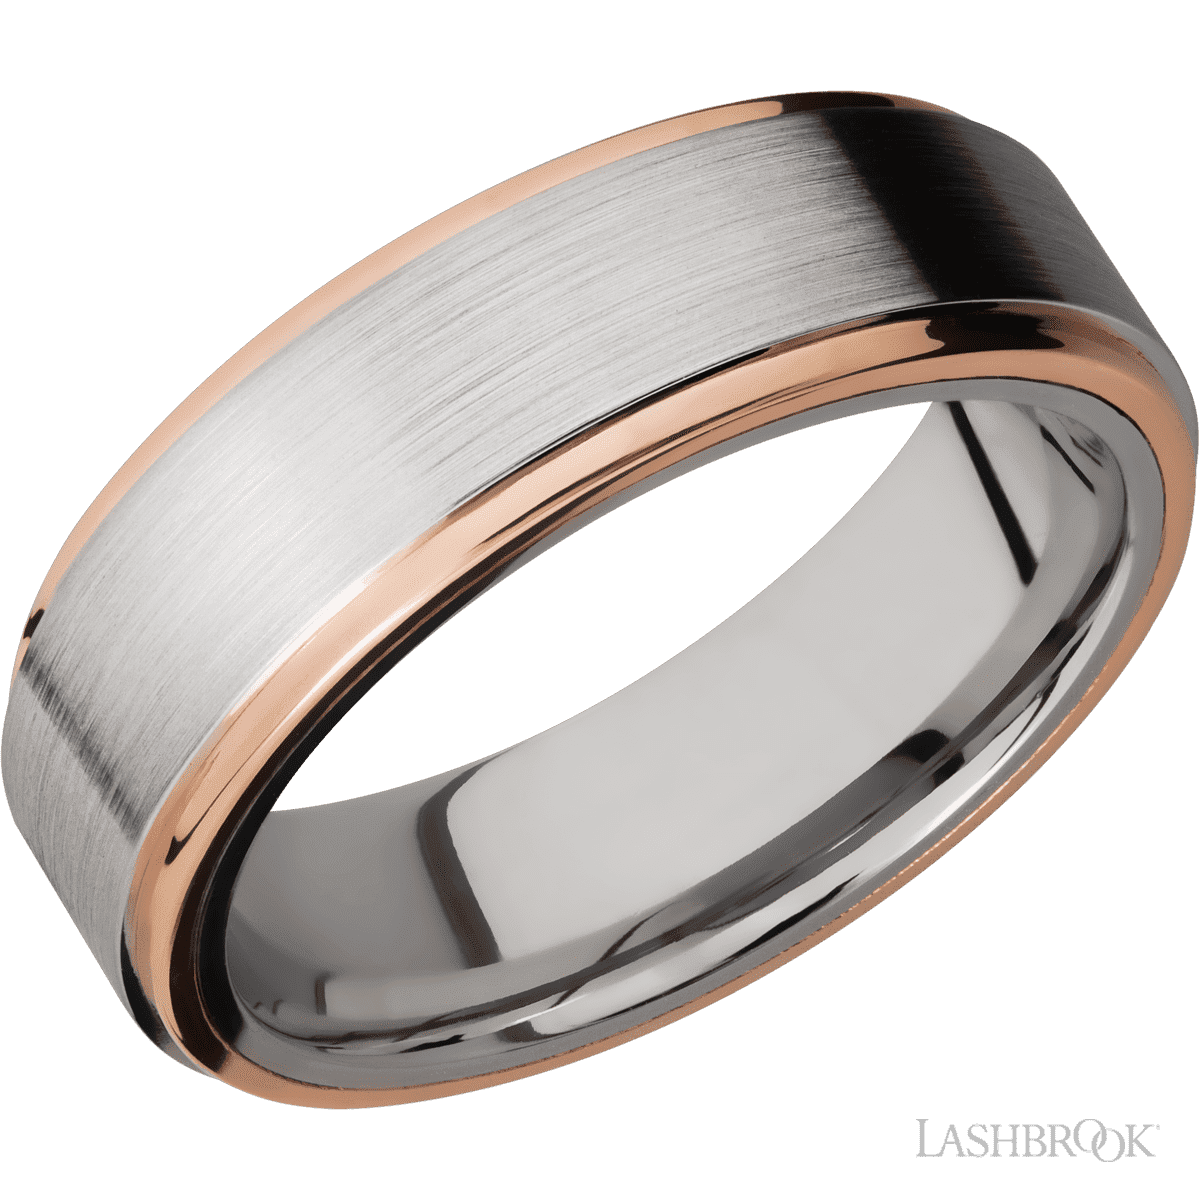 ALLOY SAMPLE SPECIAL ORDER ONLY7 mm wide/Flat Grooved Edges/Cobalt Chrome band with two 1 mm Edge inlays of 14K Rose Gold